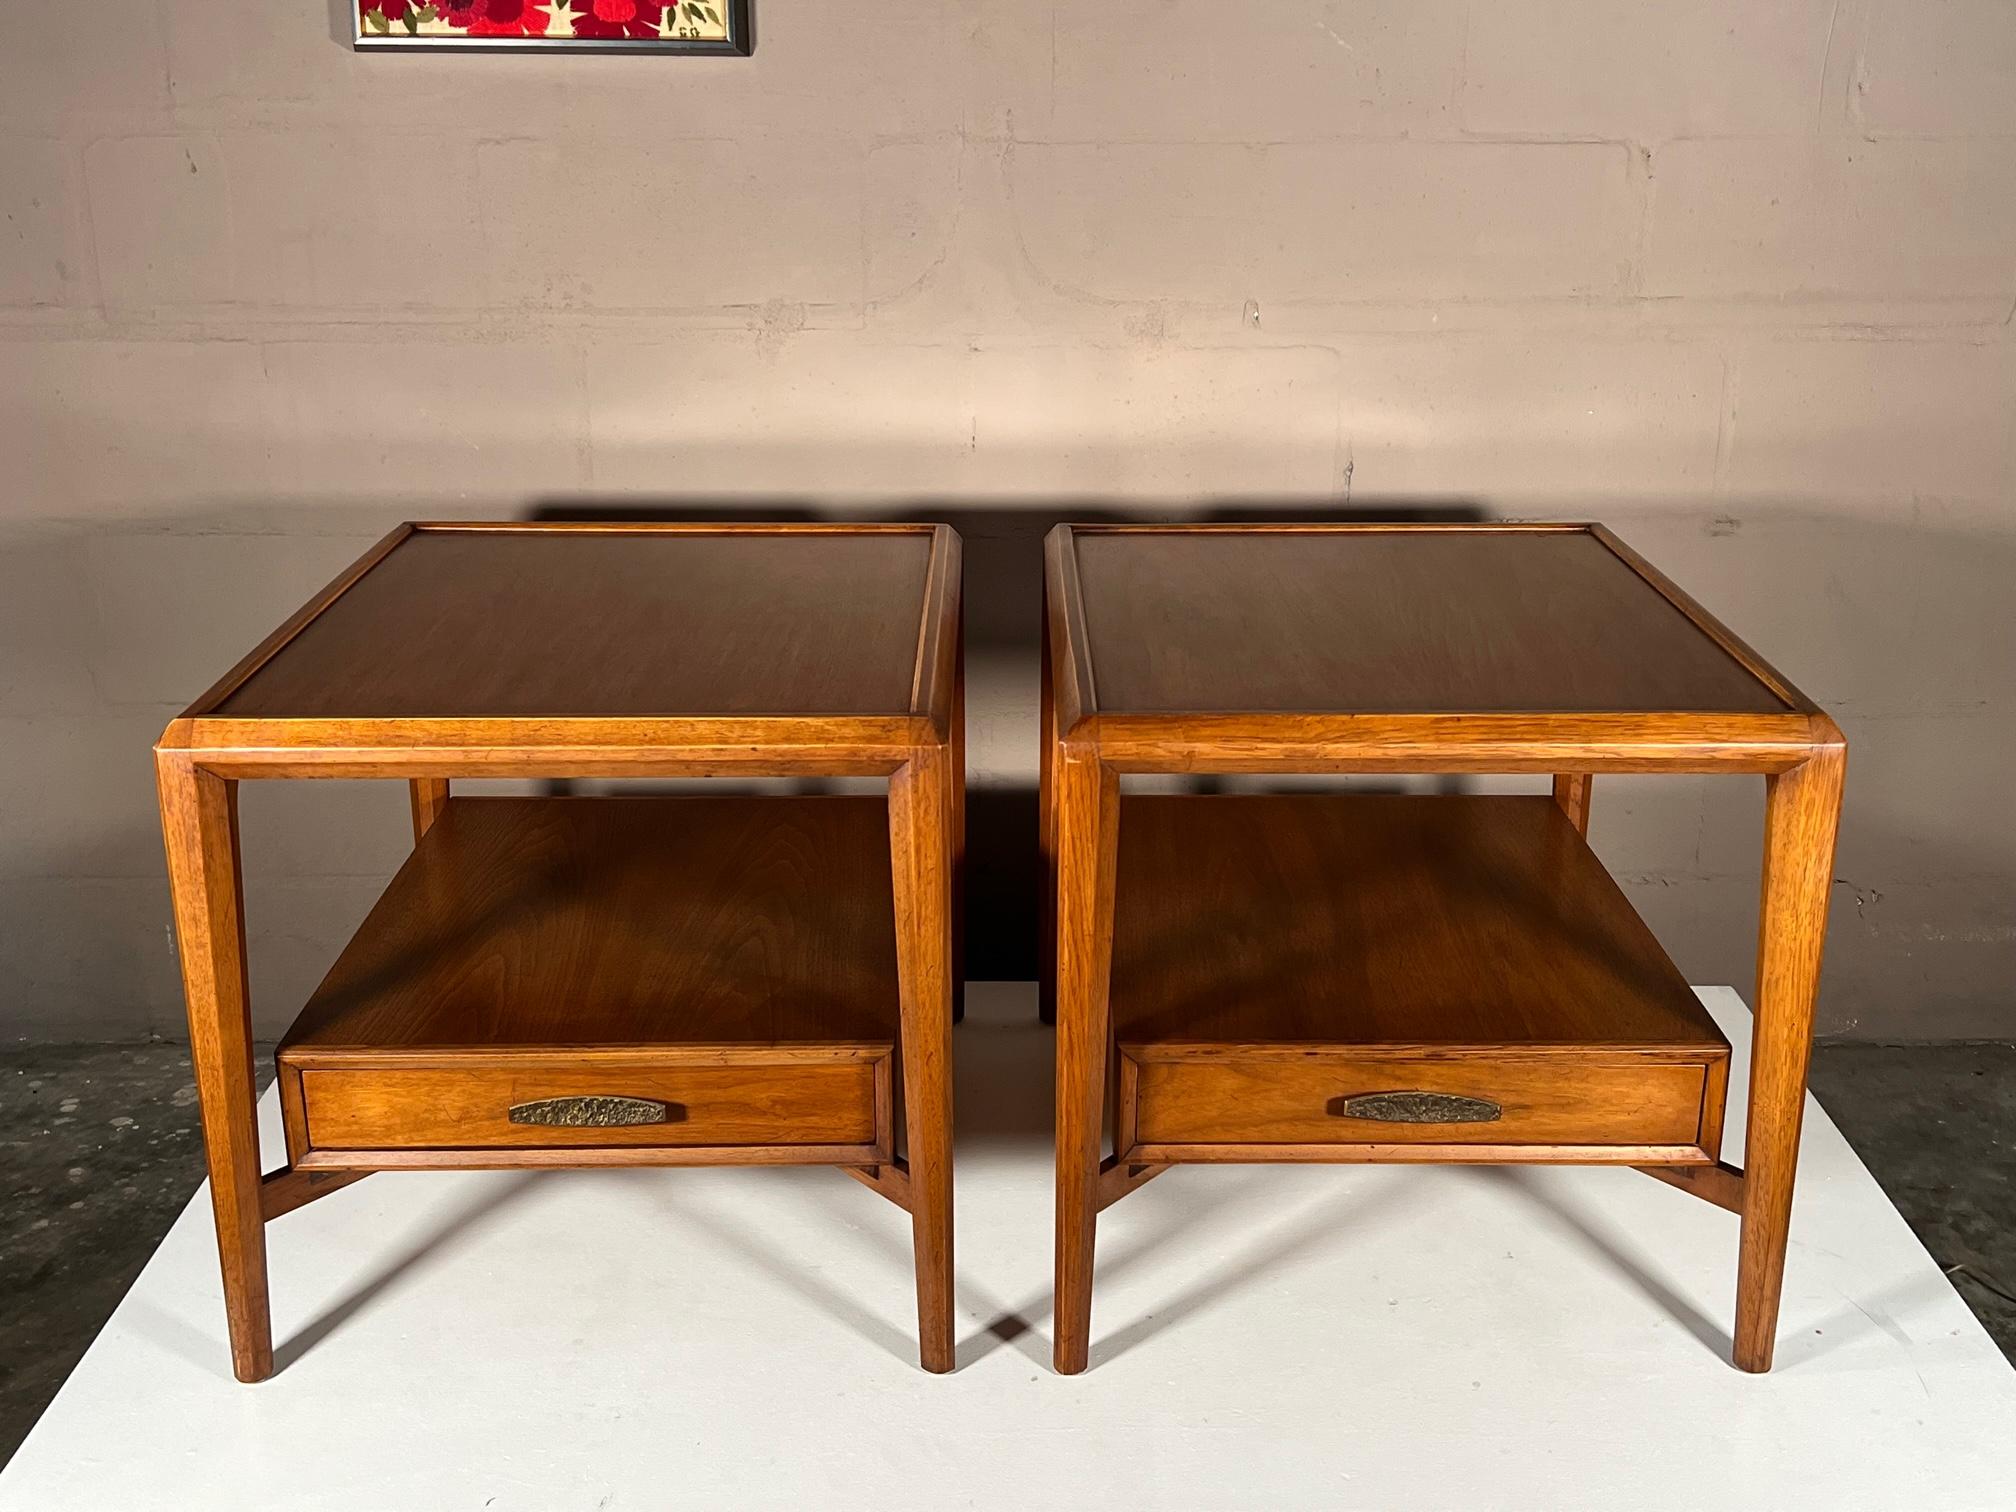 A pair of unusual Heritage Henredon nightstands. Walnut with brass details and beautiful travertine tops. Walnut frames have a nice patina. Asian style hardware in solid, heavy brass.